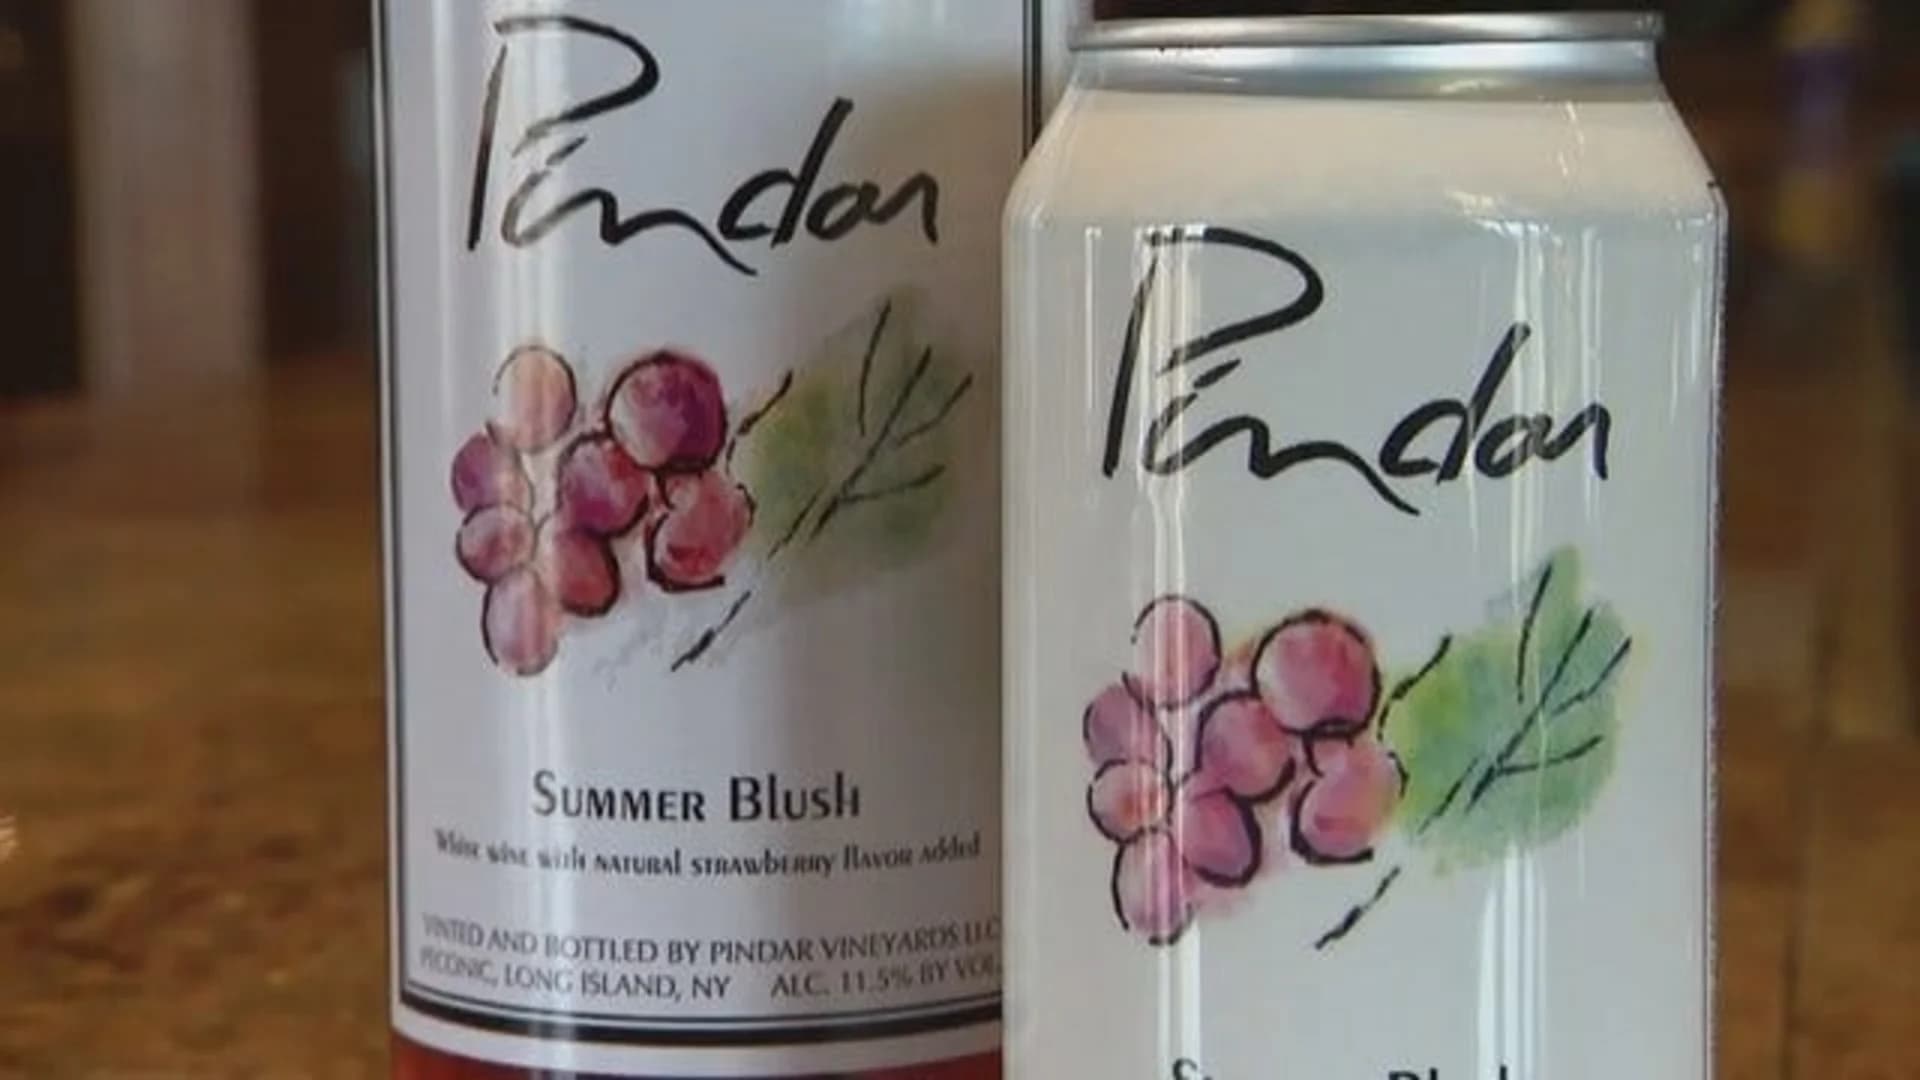 East End: Pindar puts most popular wines in cans